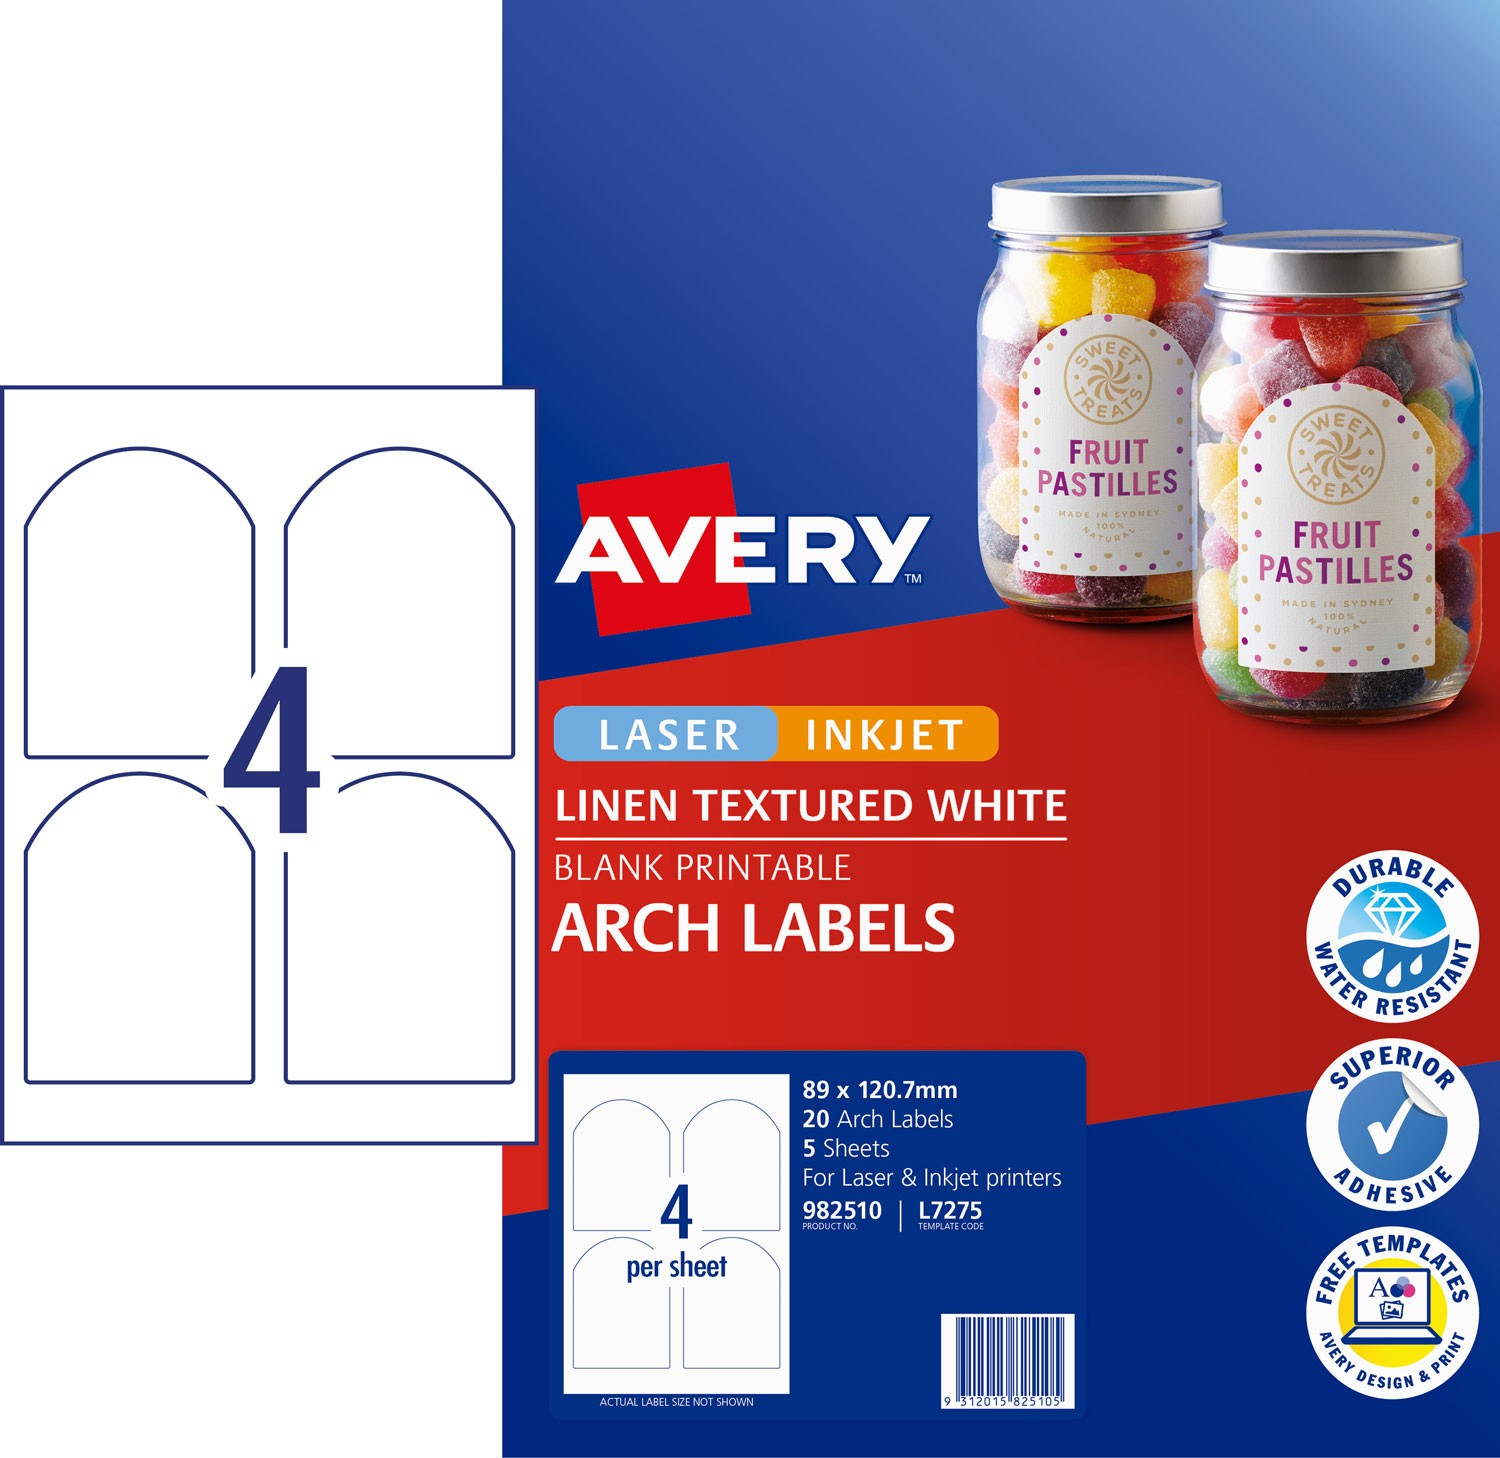 Avery 5384 Template Microsoft Word Free Programs Utilities And Apps 